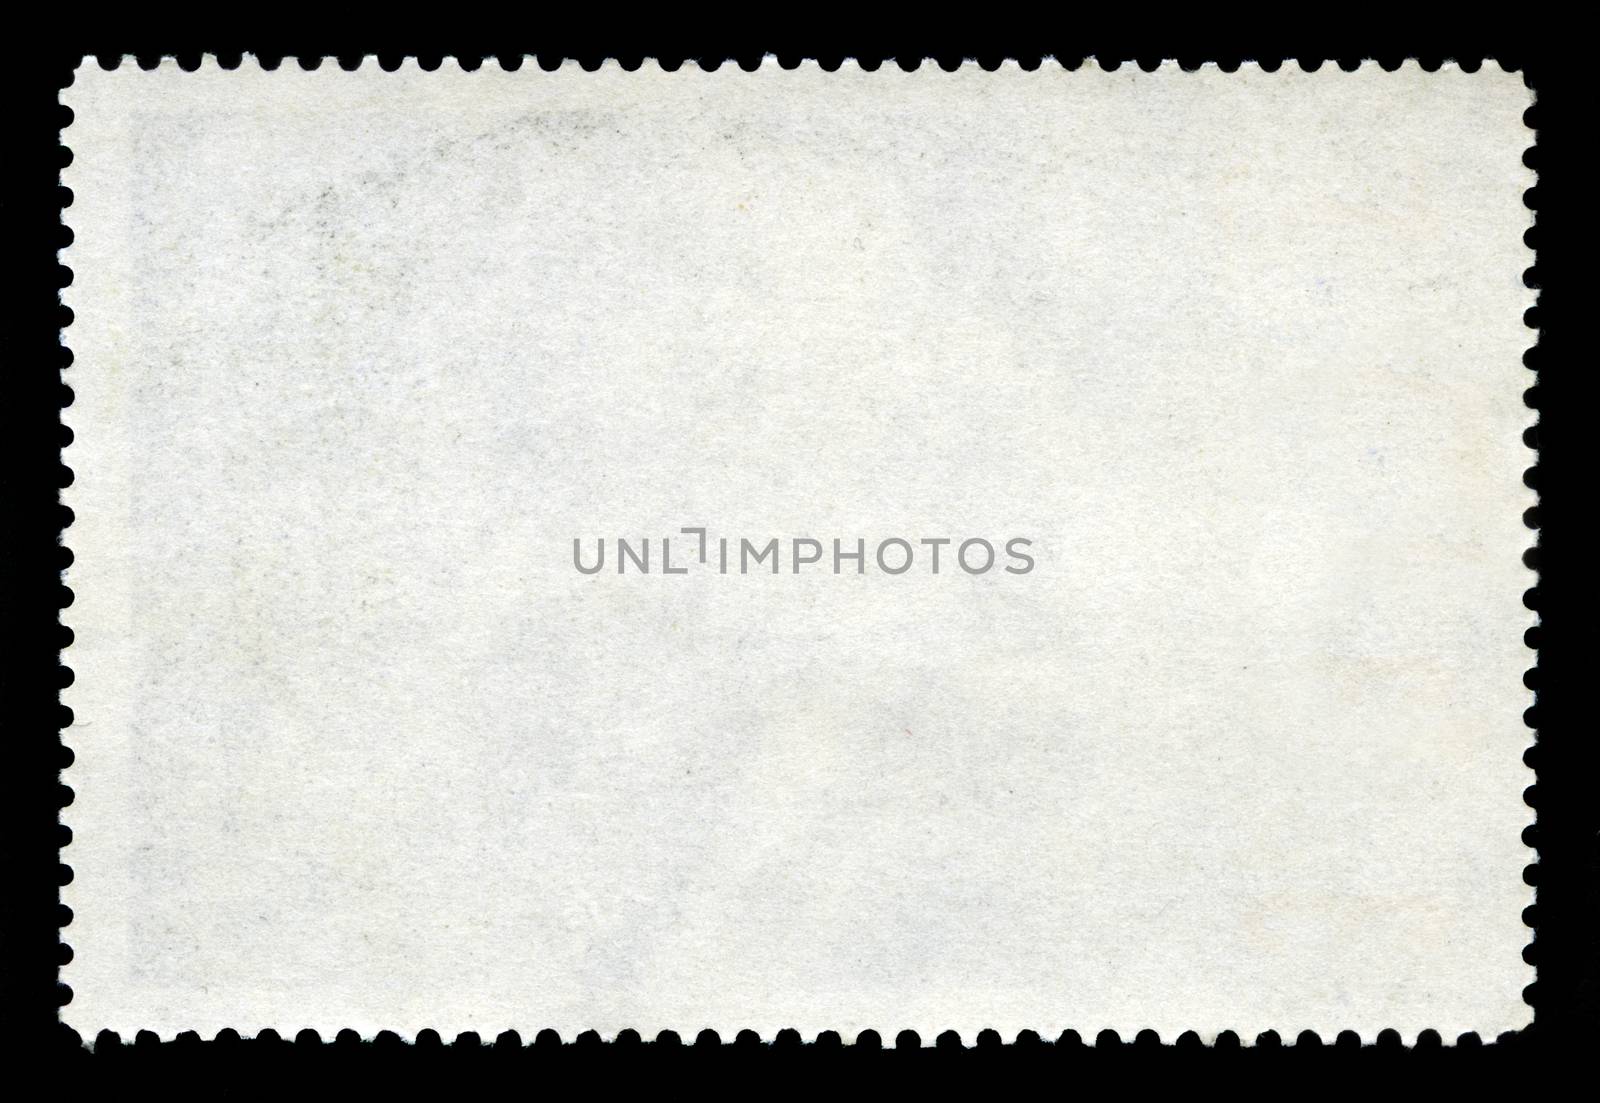 A blank postage stamp isolated on a black background.